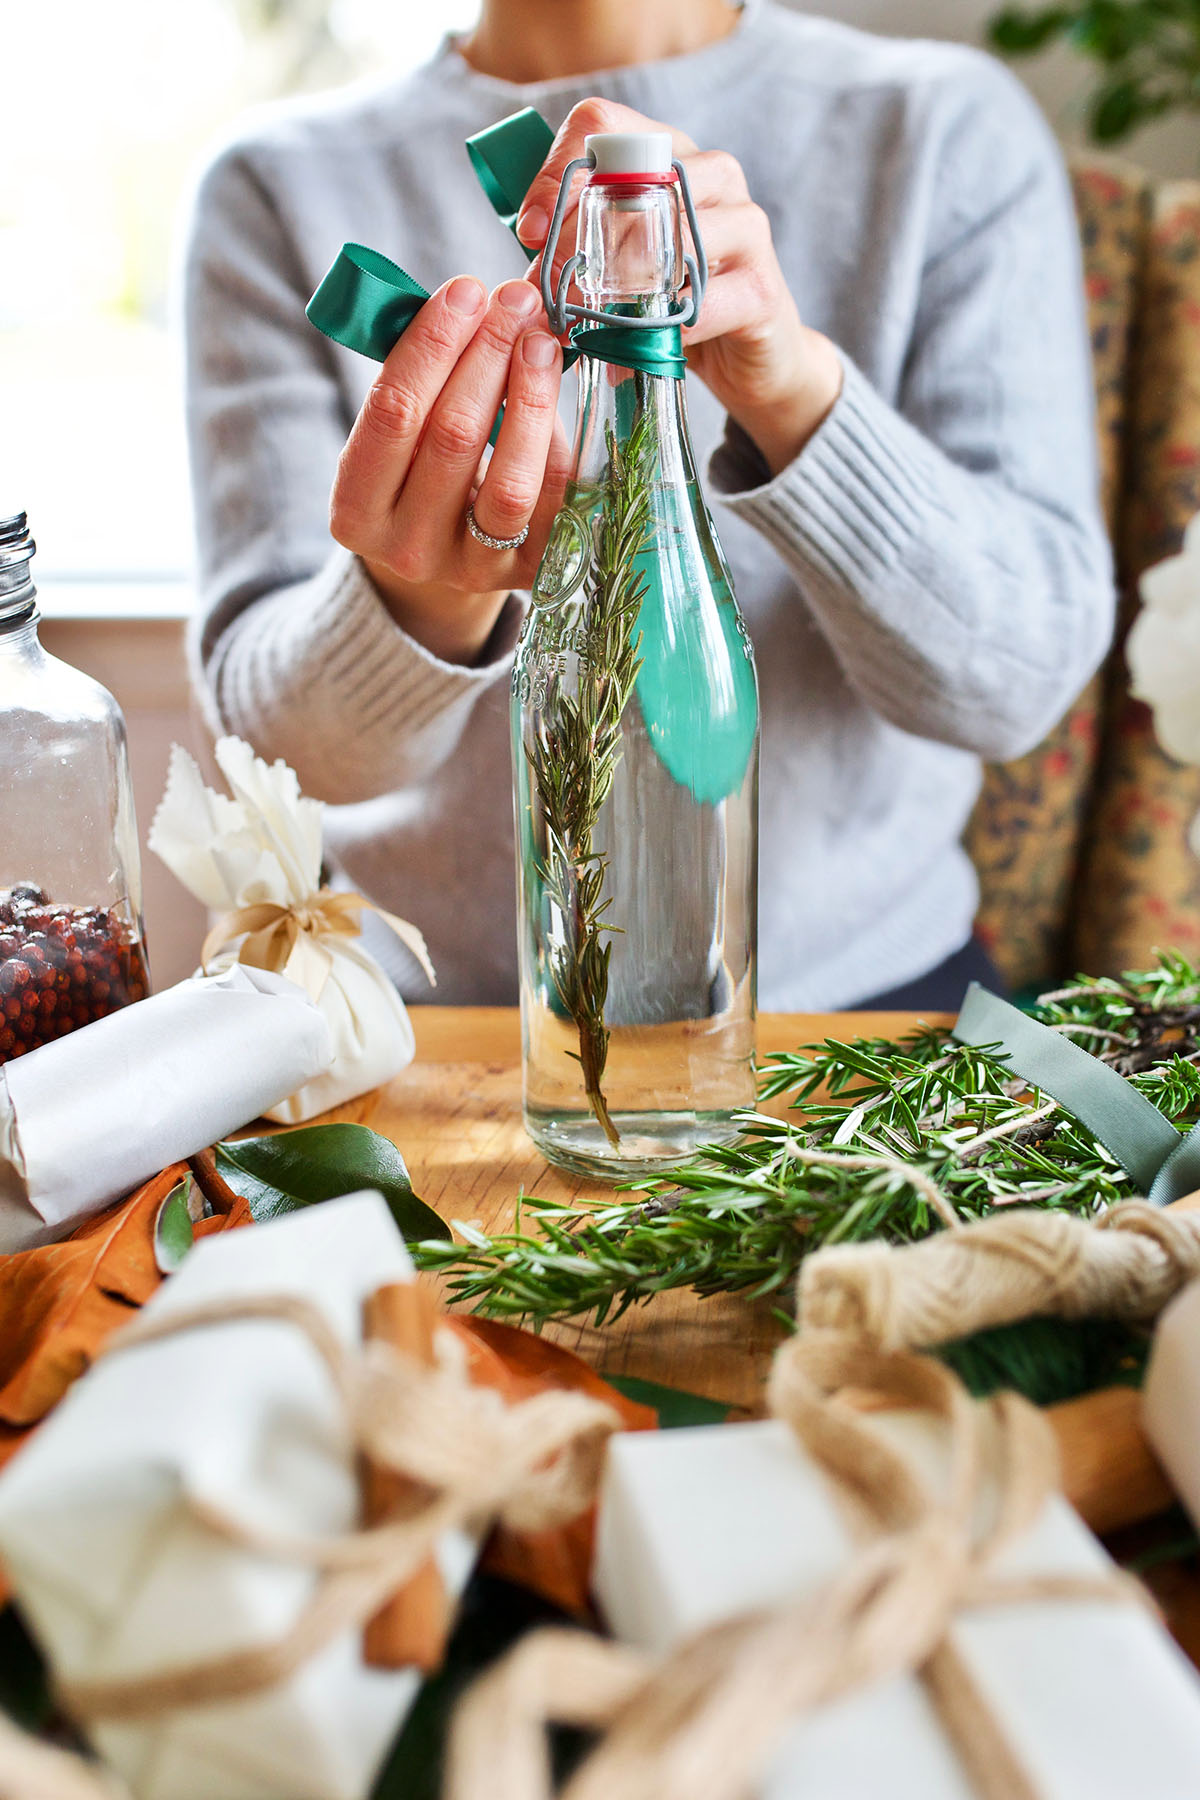 8 Herbal Holiday Preparations to Start Brewing Now! | Herbal Academy | Now is the time to get started making herbal gifts that require time to brew! Here are eight of our favorite herbal holiday preparations to start now.